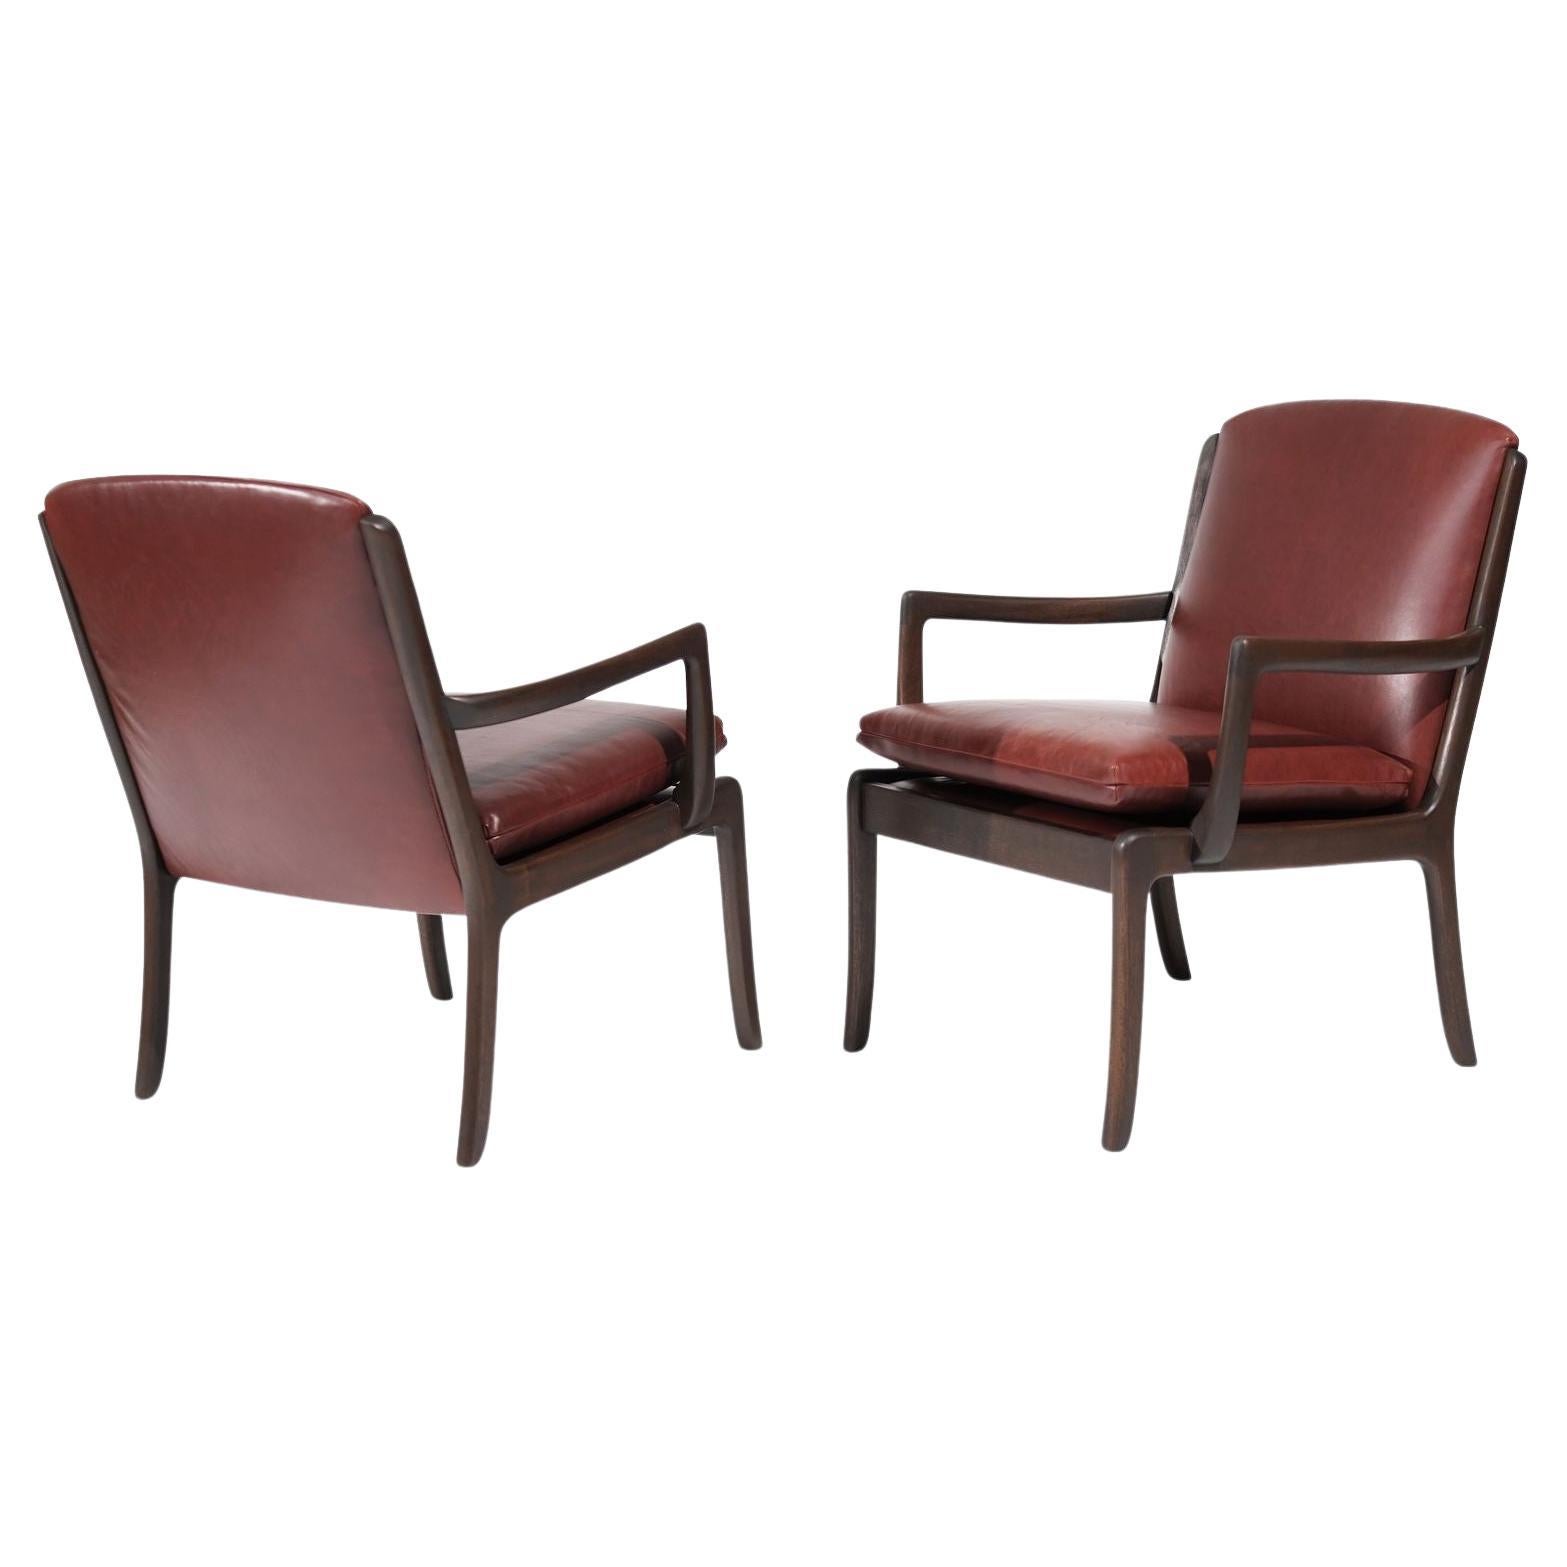 Set of Lounge Chairs by Ole Wanscher in Sangria Leather, Denmark, C. 1960s